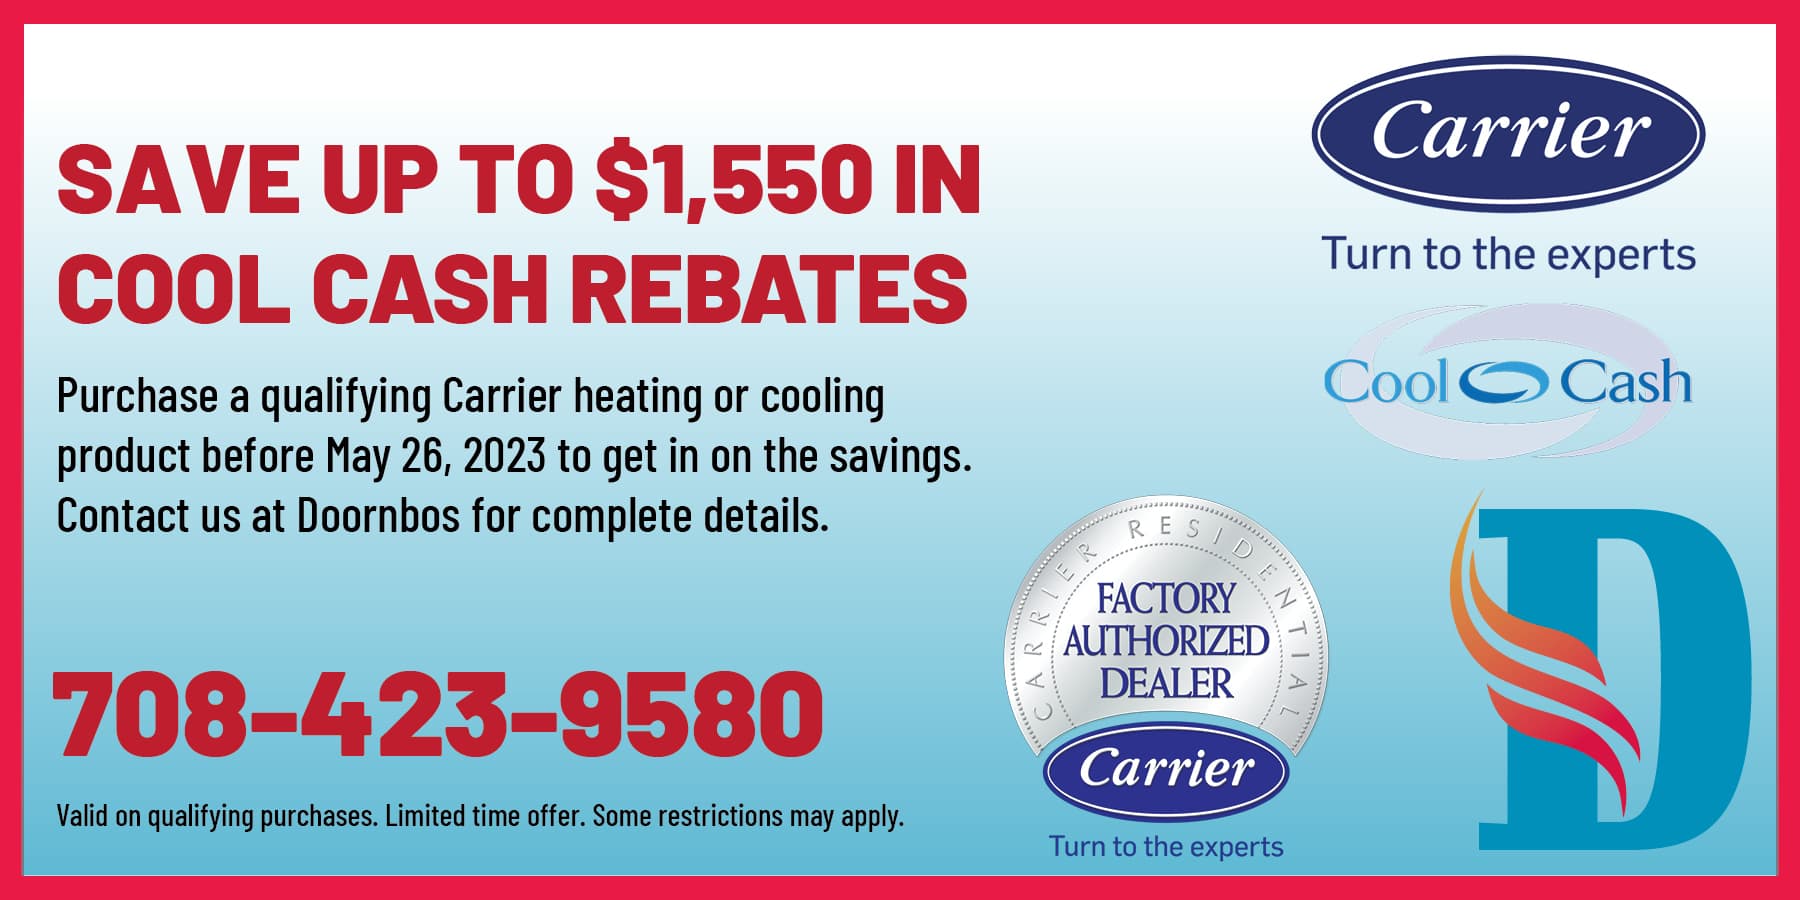 Save up to $1550 in COOL CASH rebates! Purchase a qualifying Carrier heating or cooling product before May 26, 2023 to get in on the savings. Contact us at Doornbos for complete details.